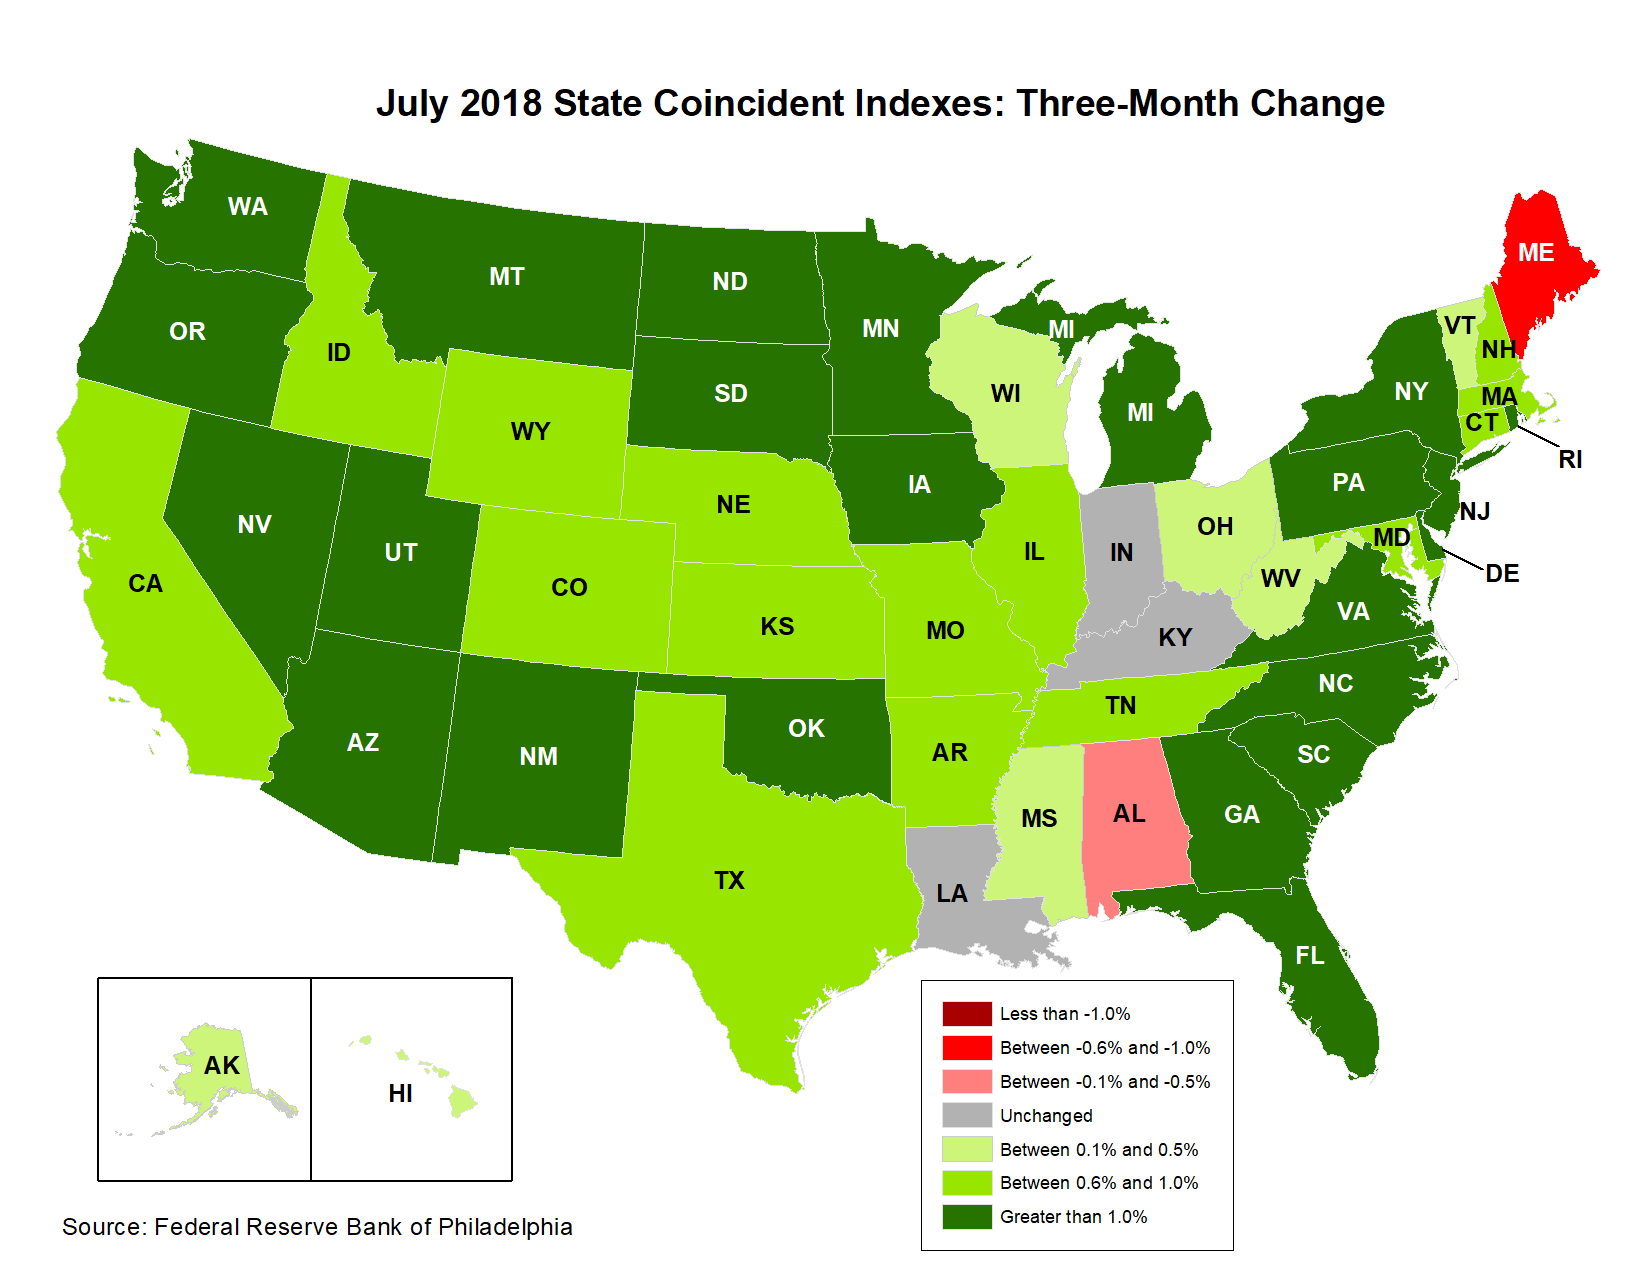 Map of the U.S. showing the State Coincident Indexes Three-Month Change in July 2018